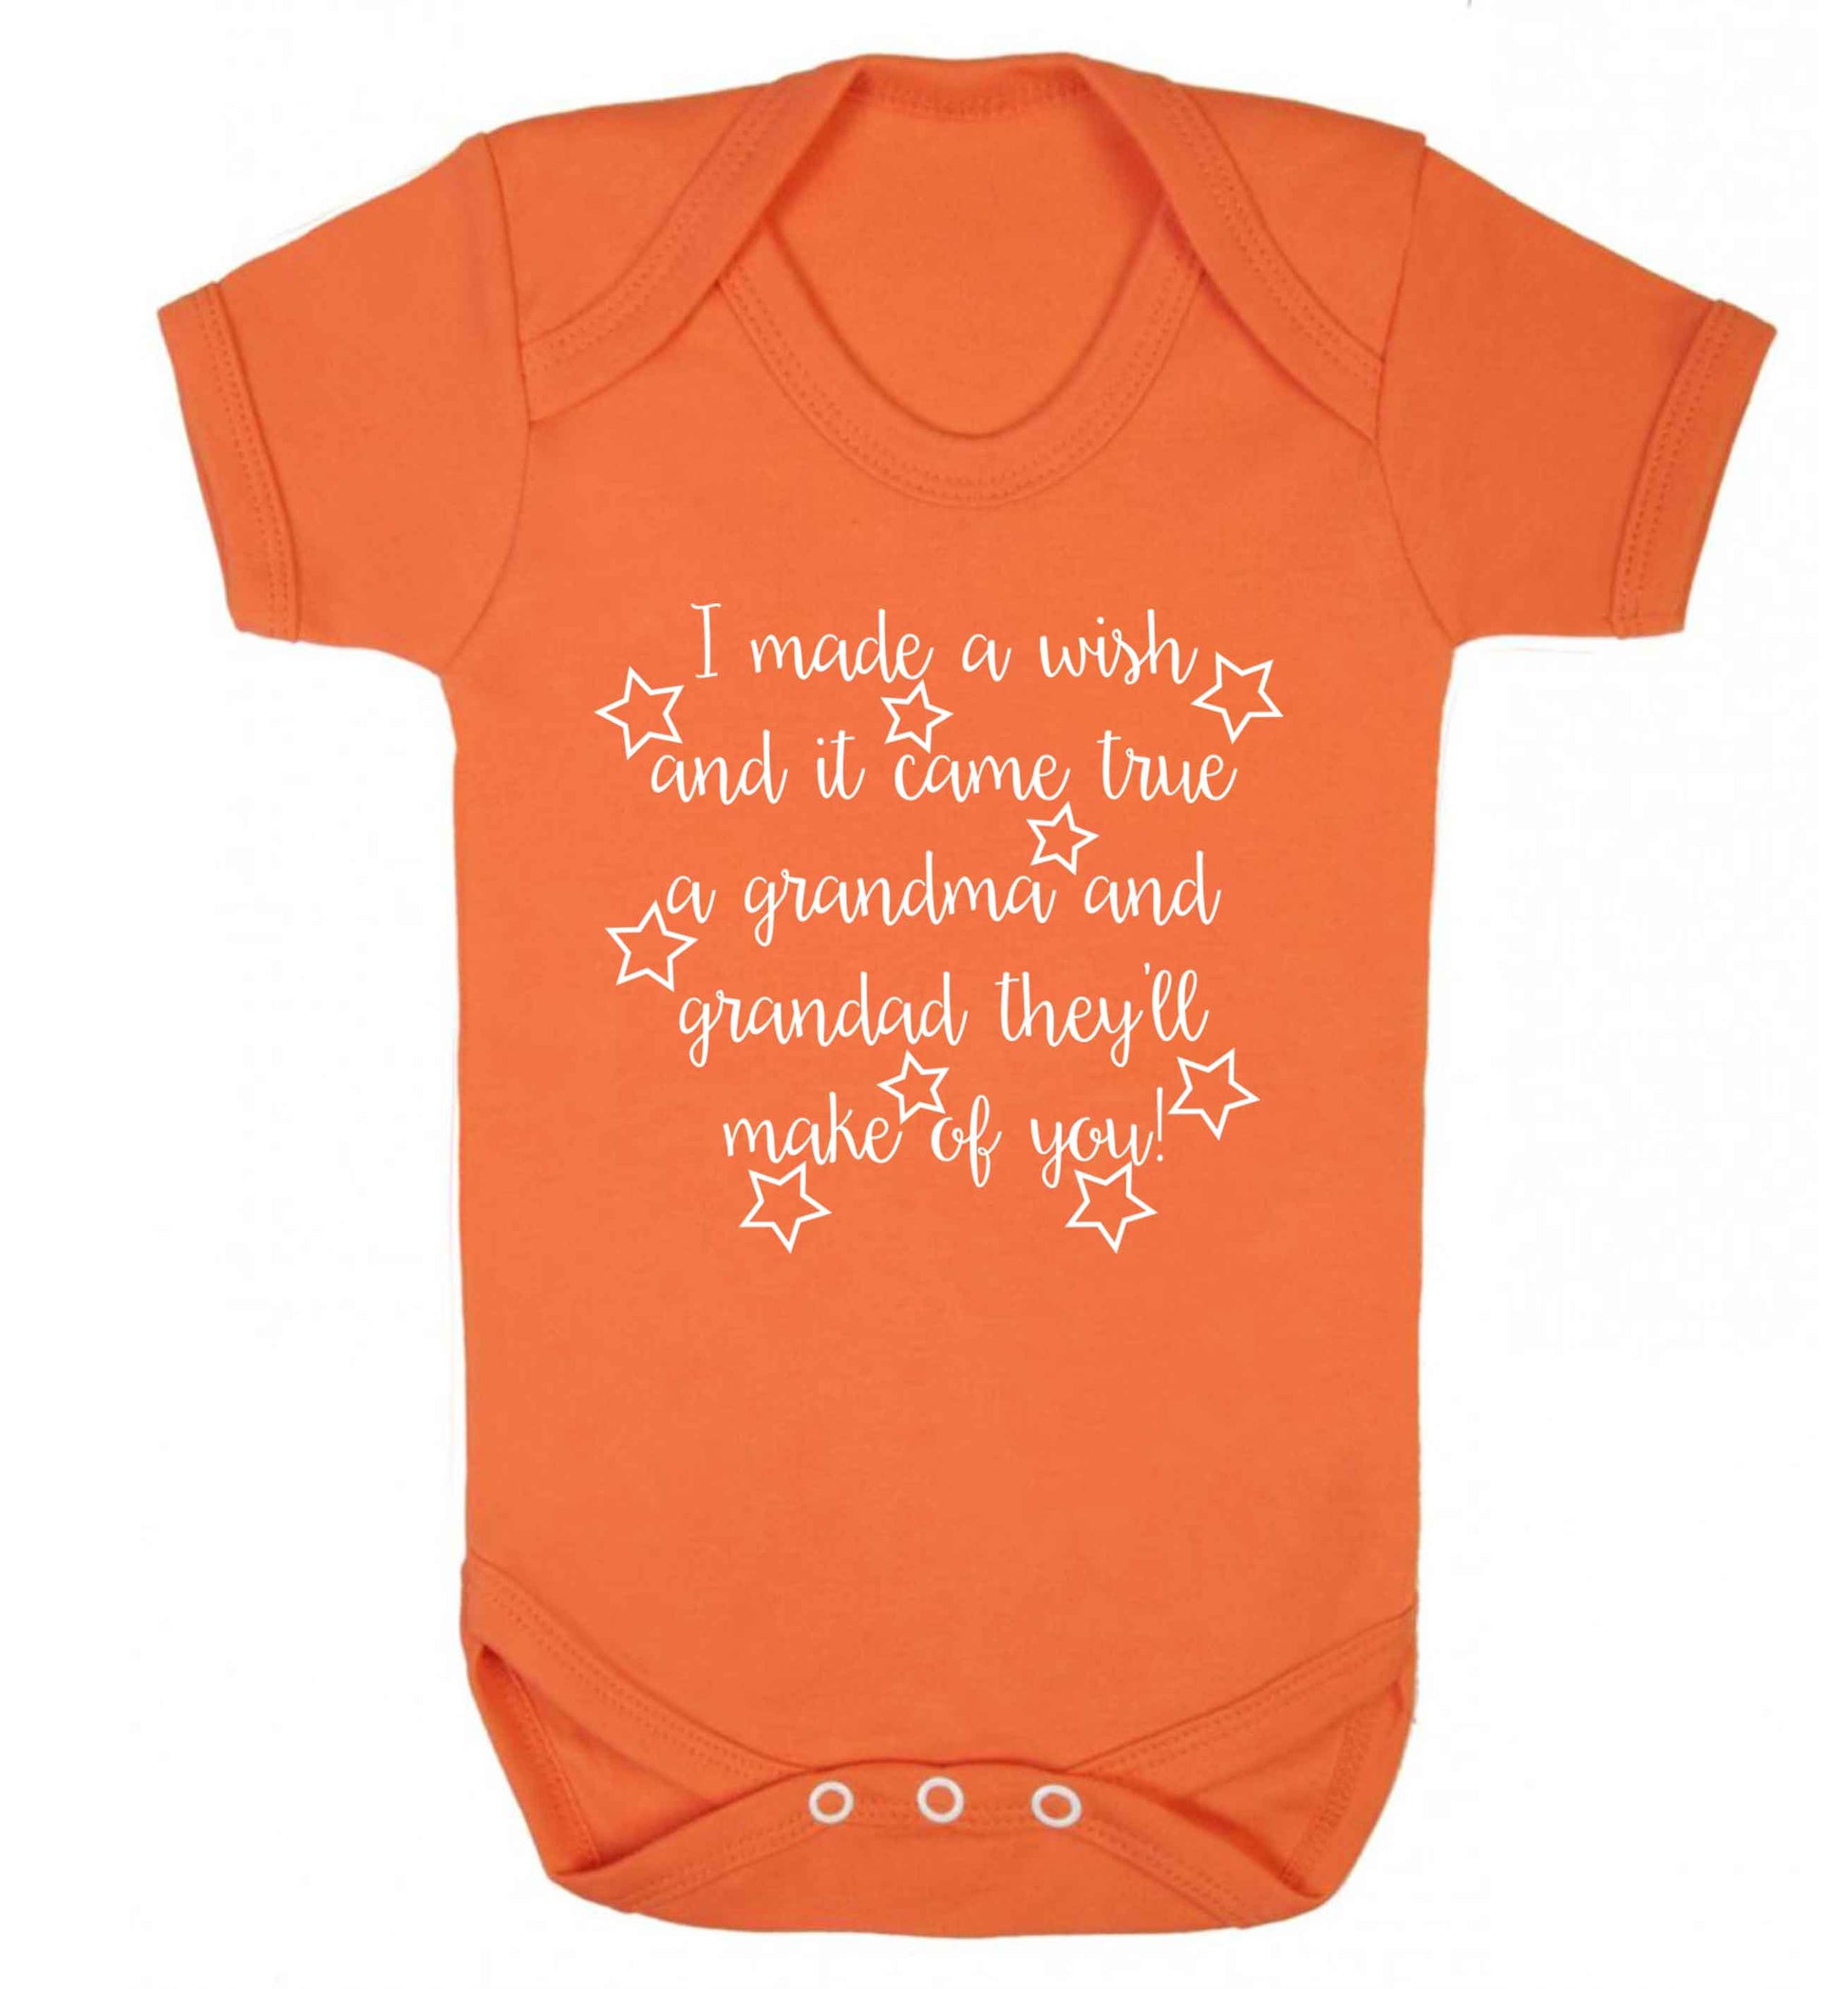 I made a wish and it came true a grandma and grandad they'll make of you! Baby Vest orange 18-24 months